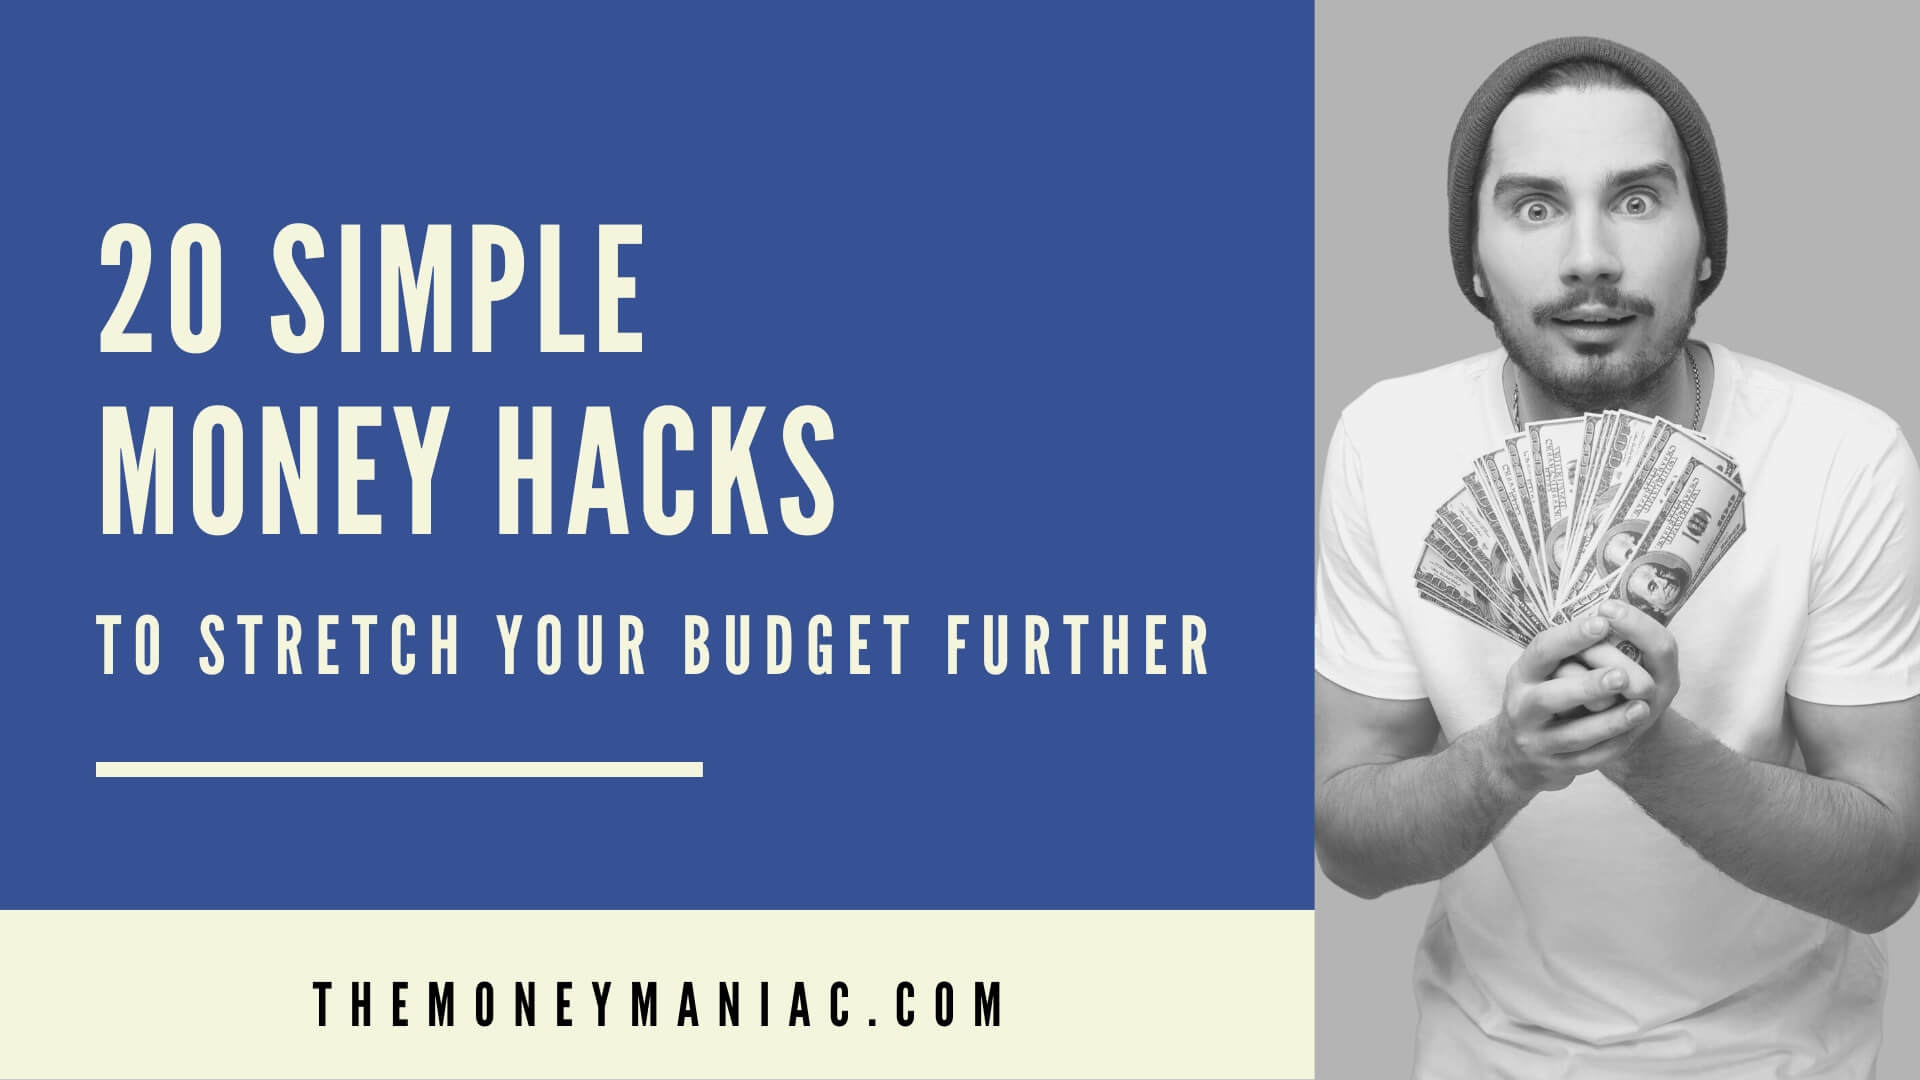 20 simple money hacks to fast-track your savings